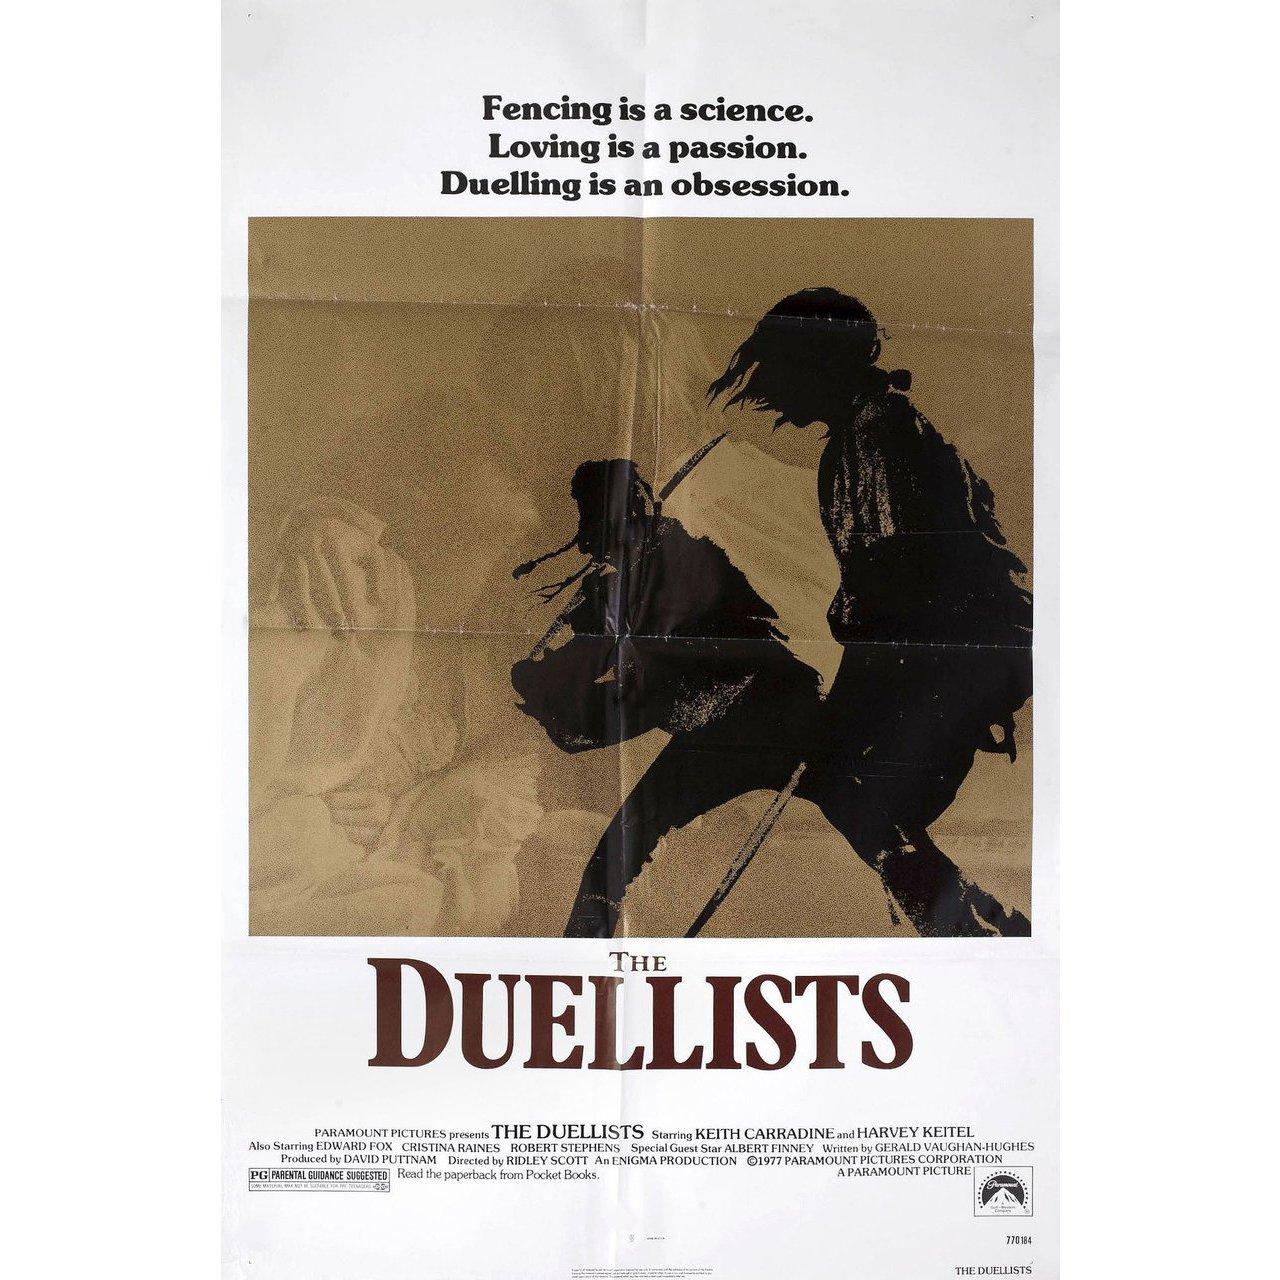 Original 1977 U.S. one sheet poster for the film “The Duellists” directed by Ridley Scott with Keith Carradine / Harvey Keitel / Albert Finney / Edward Fox. Very good-fine condition, folded. Many original posters were issued folded or were